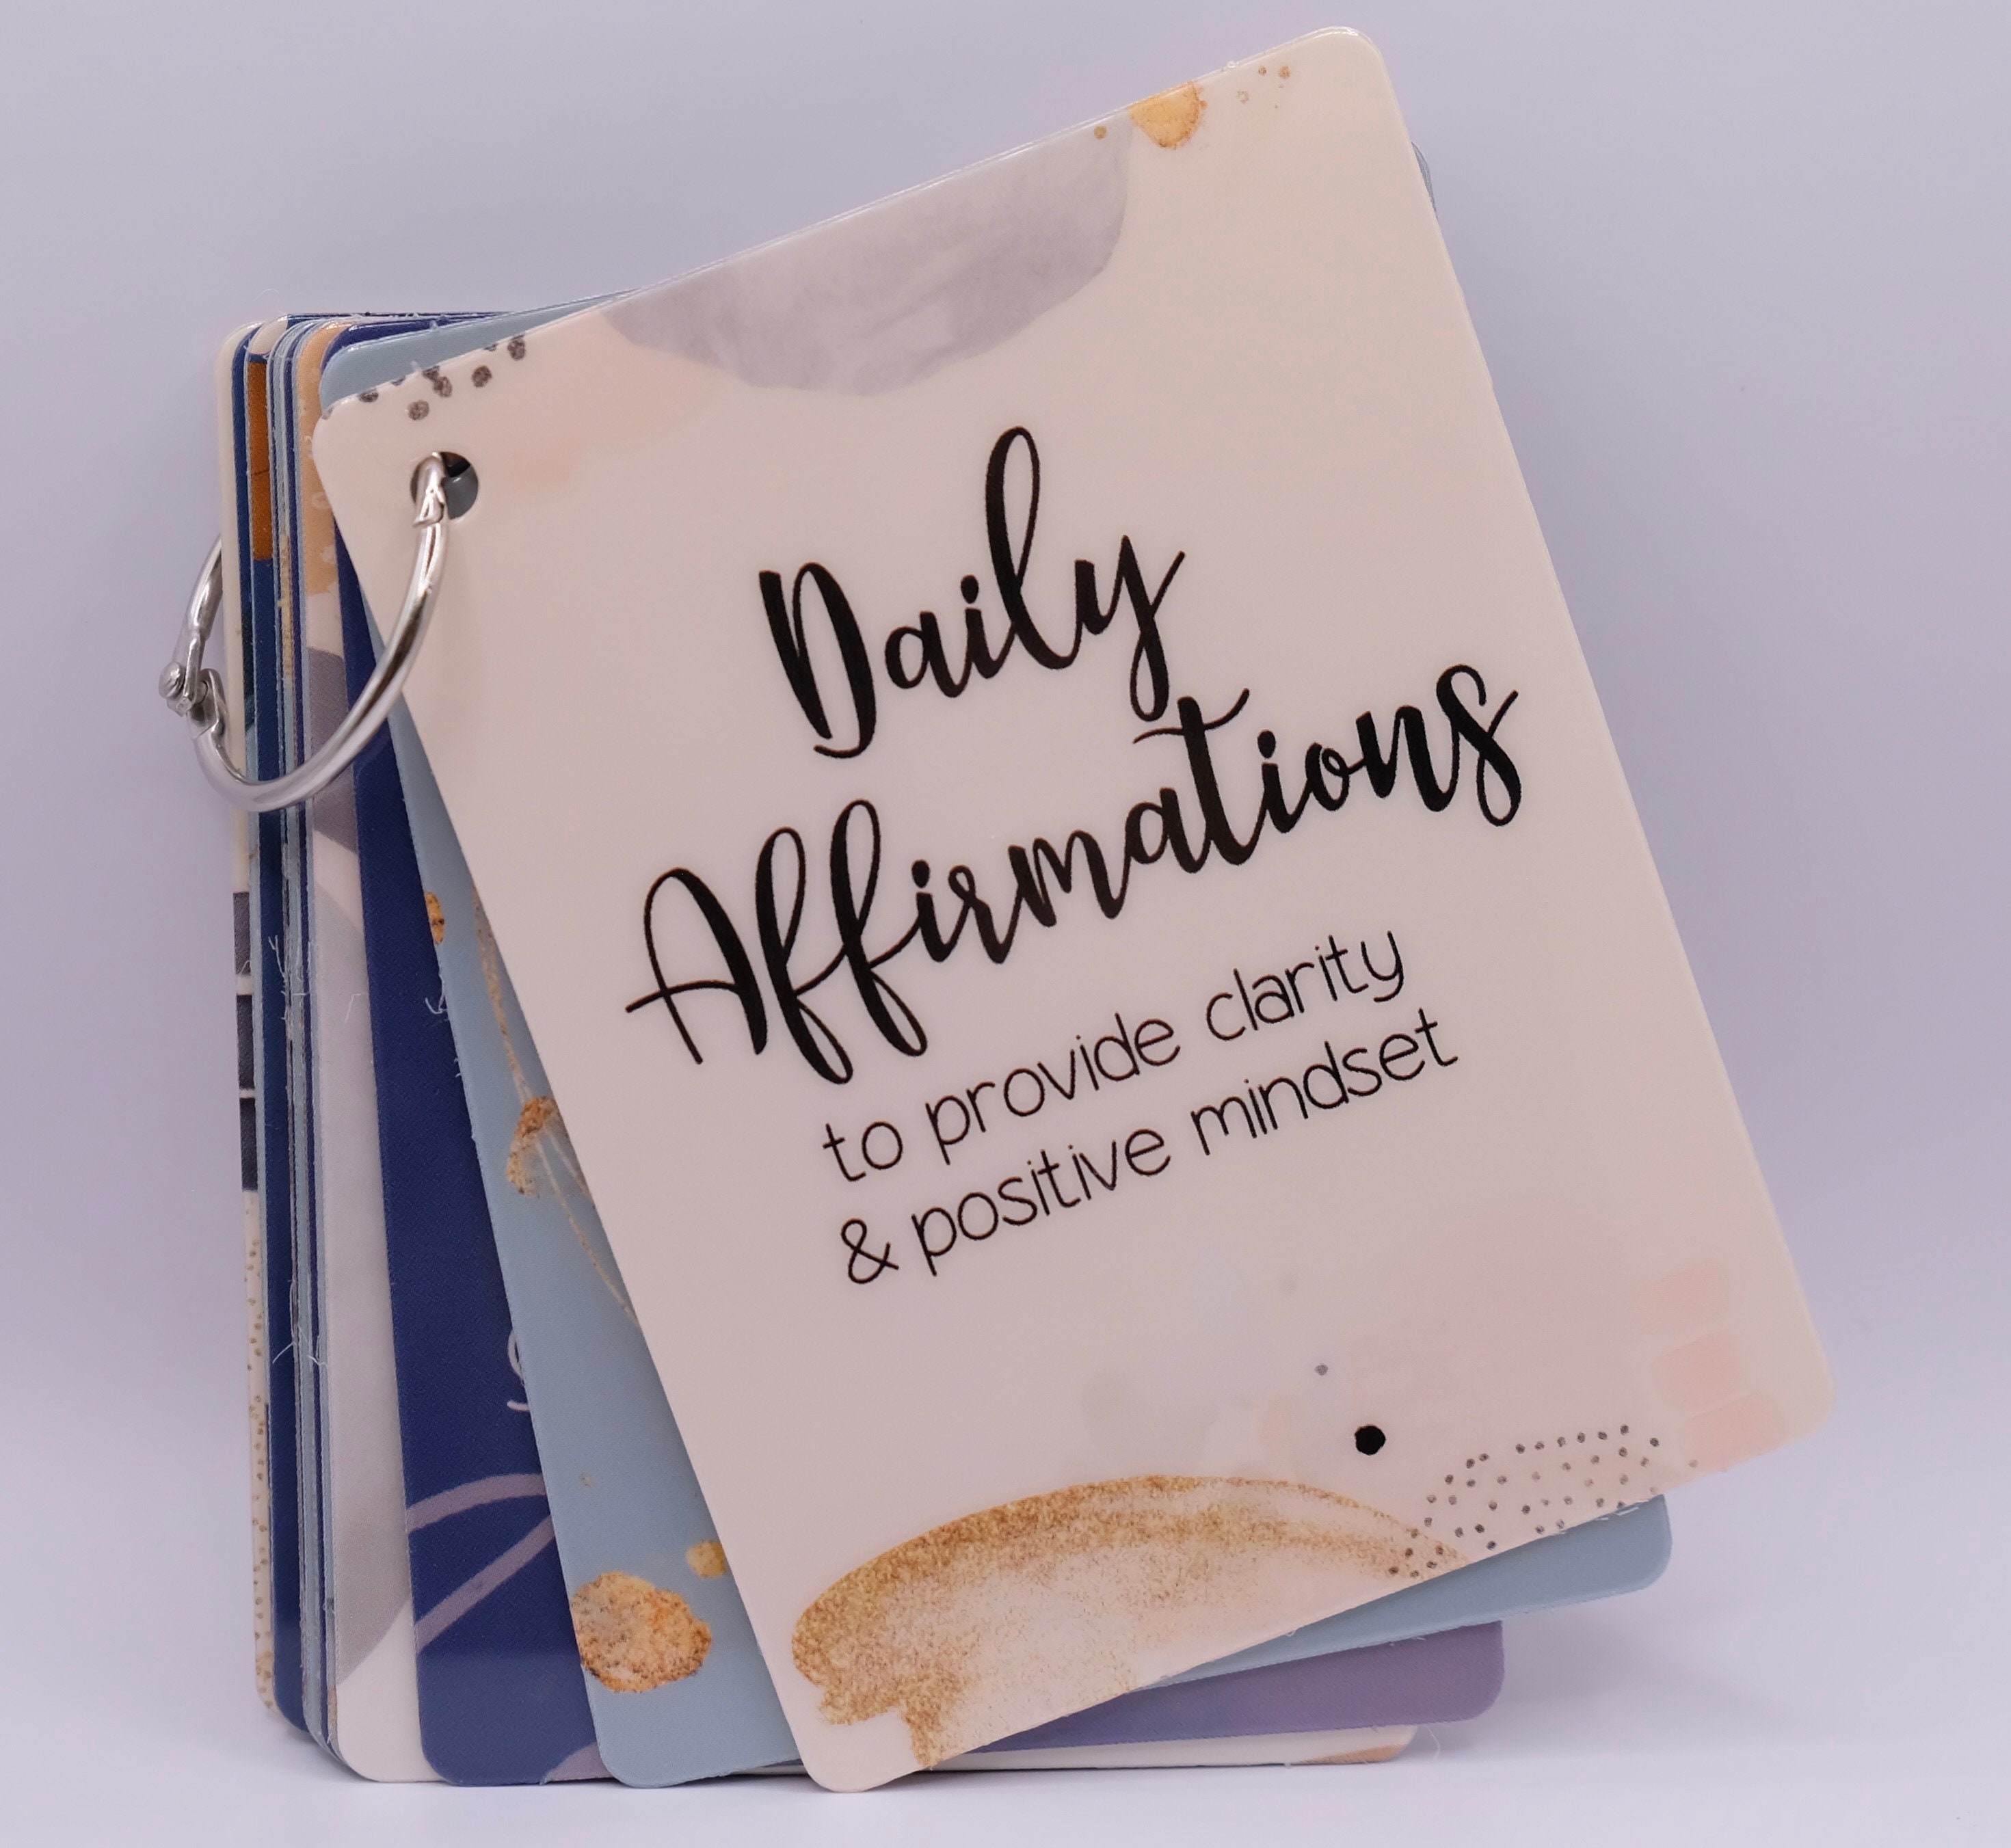 Daily Mindful Lettering Book 3: 30 Days of Affirmations for Your